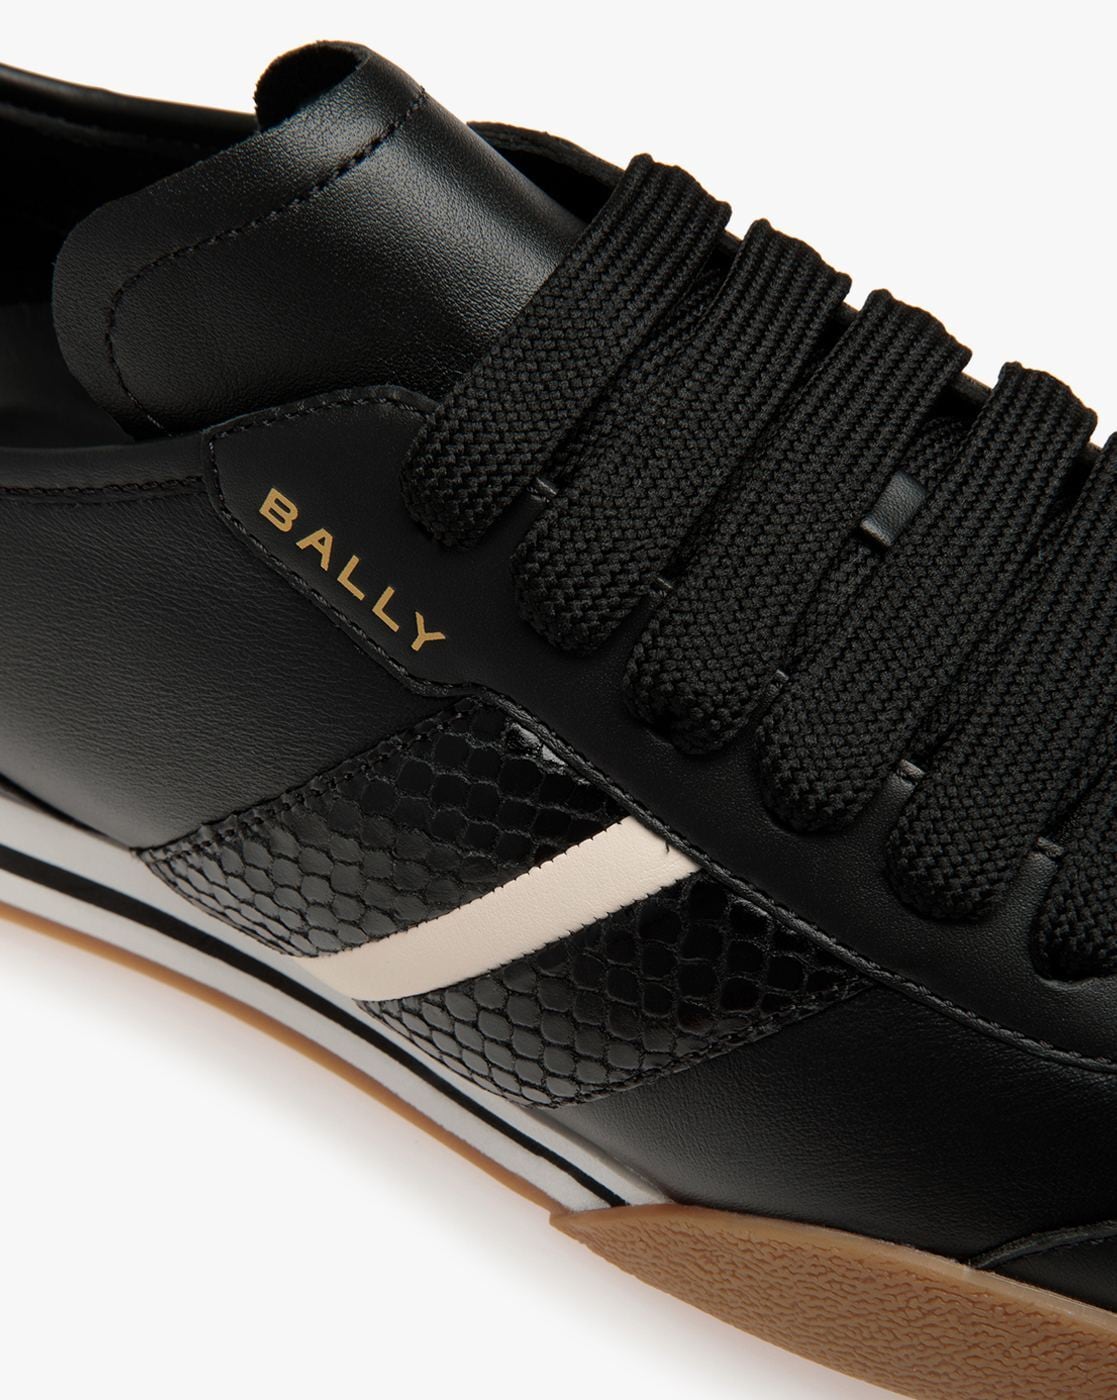 Bally Mitty Leather Black / Green Low Top Sneakers - Sneak in Peace